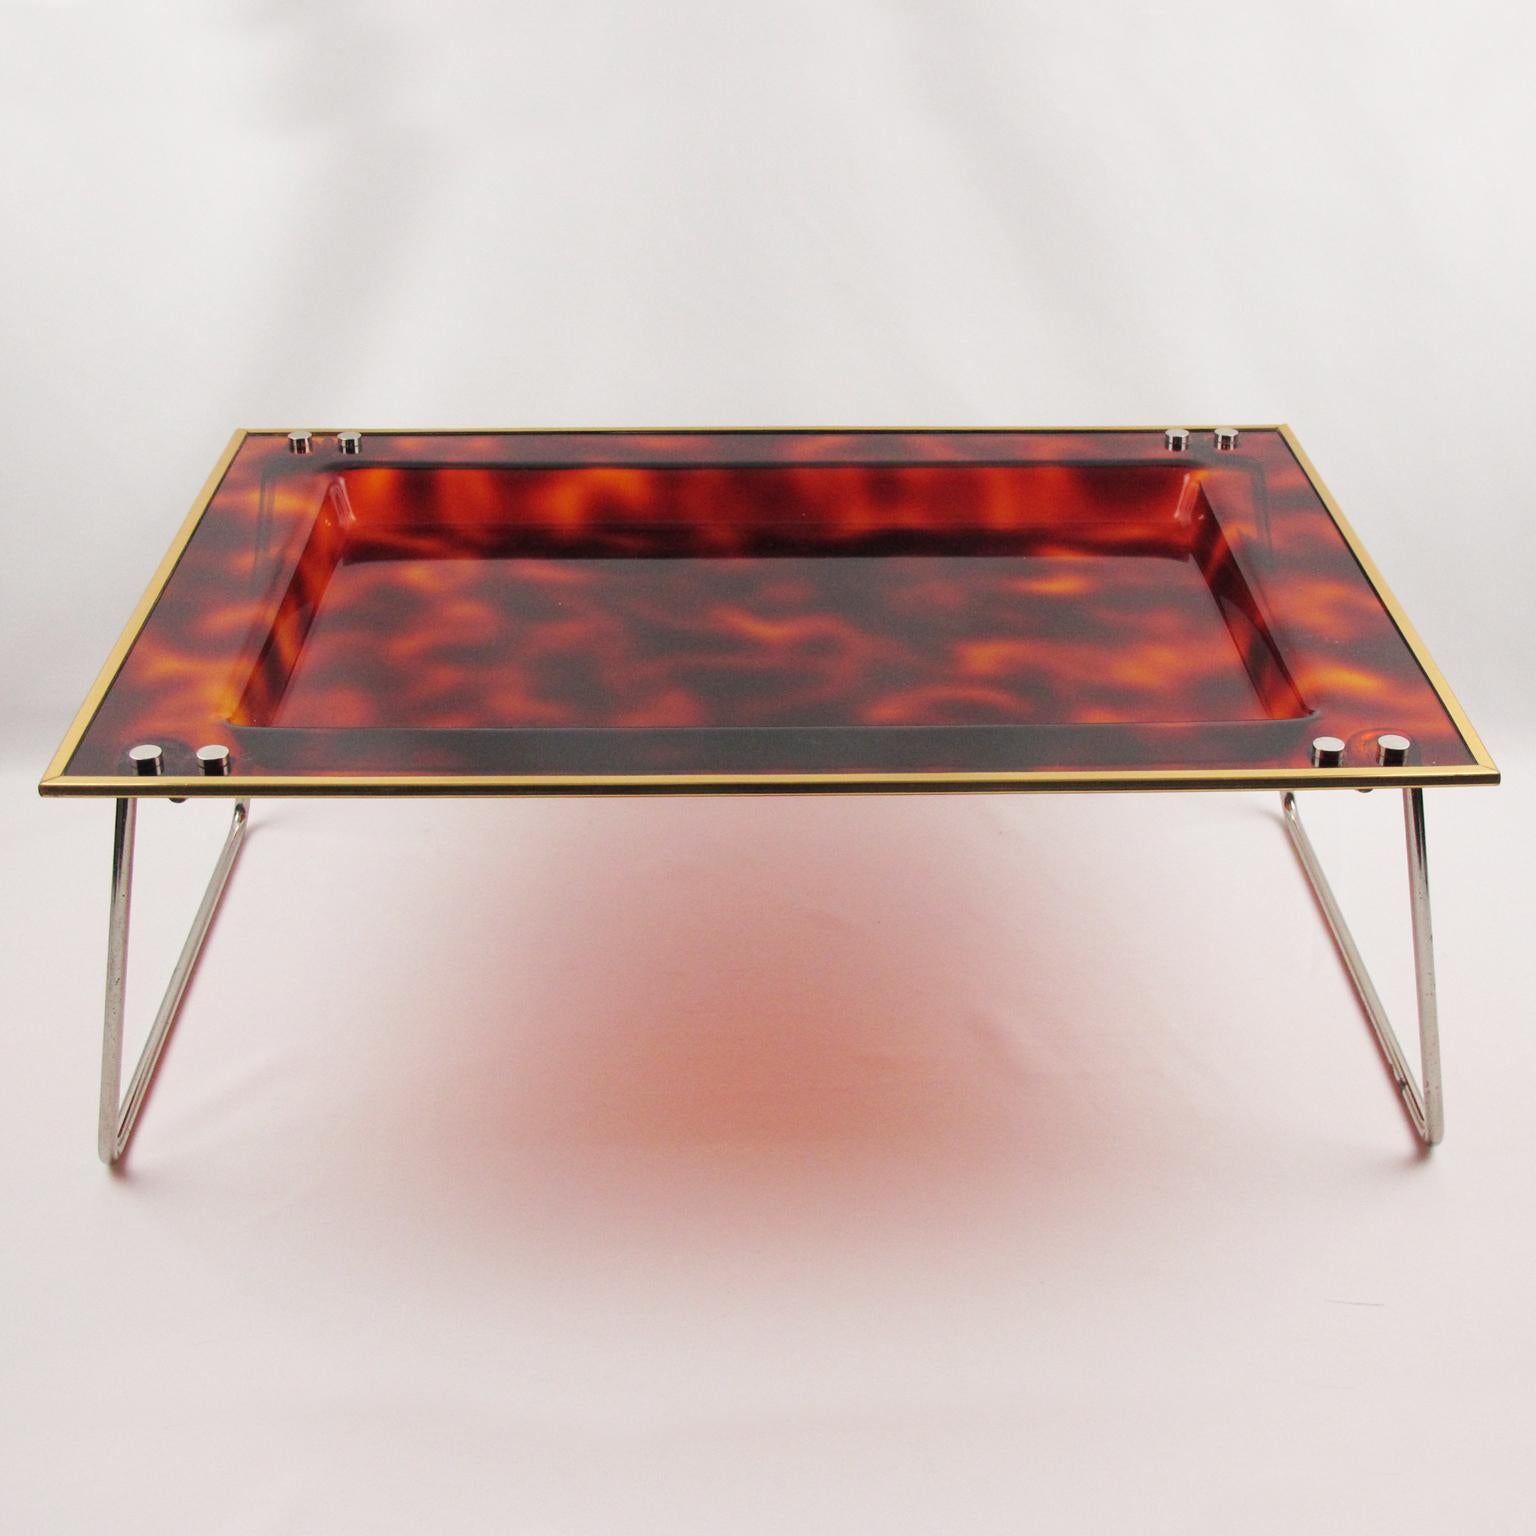 Pretty Italian Lucite and brass serving tray. Oversized rectangular shape barware butler folding tray with a translucent tortoiseshell textured pattern. The chromed metal legs fold up and are hinged, thus it can sit flat or raised. Perfect for